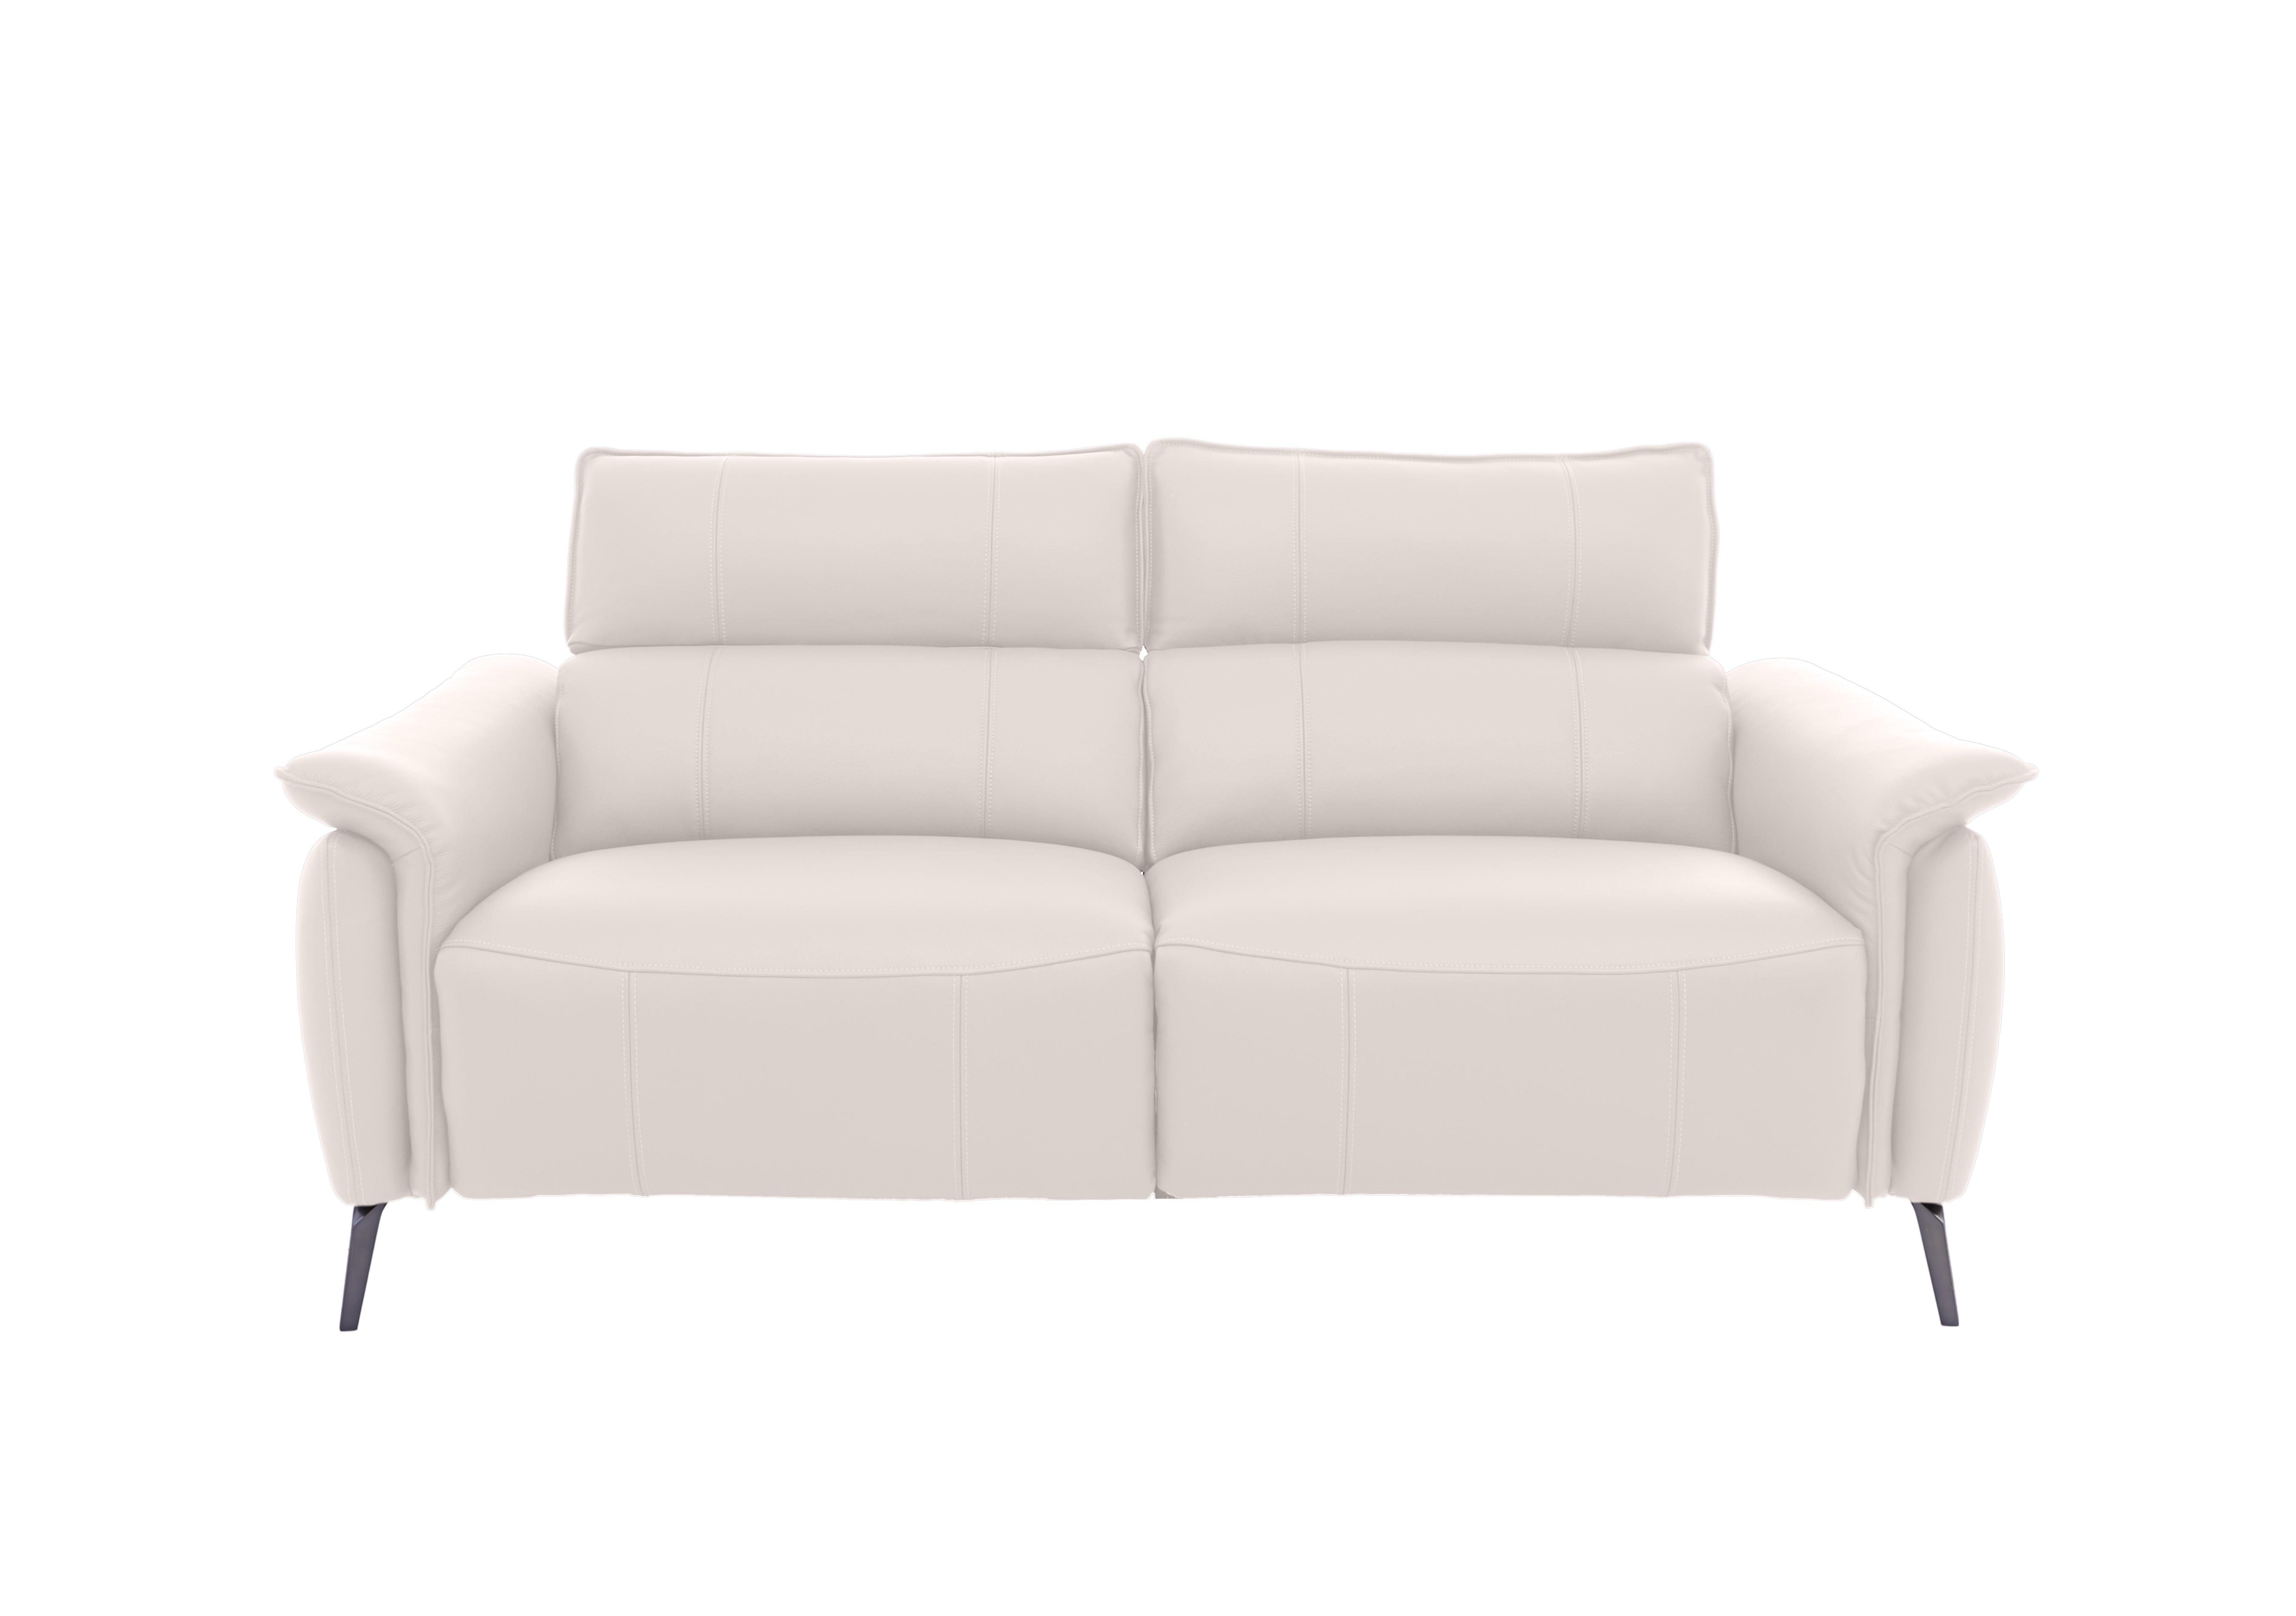 Jude 3 Seater Leather Sofa in Montana Cotton Cat-40/13 on Furniture Village